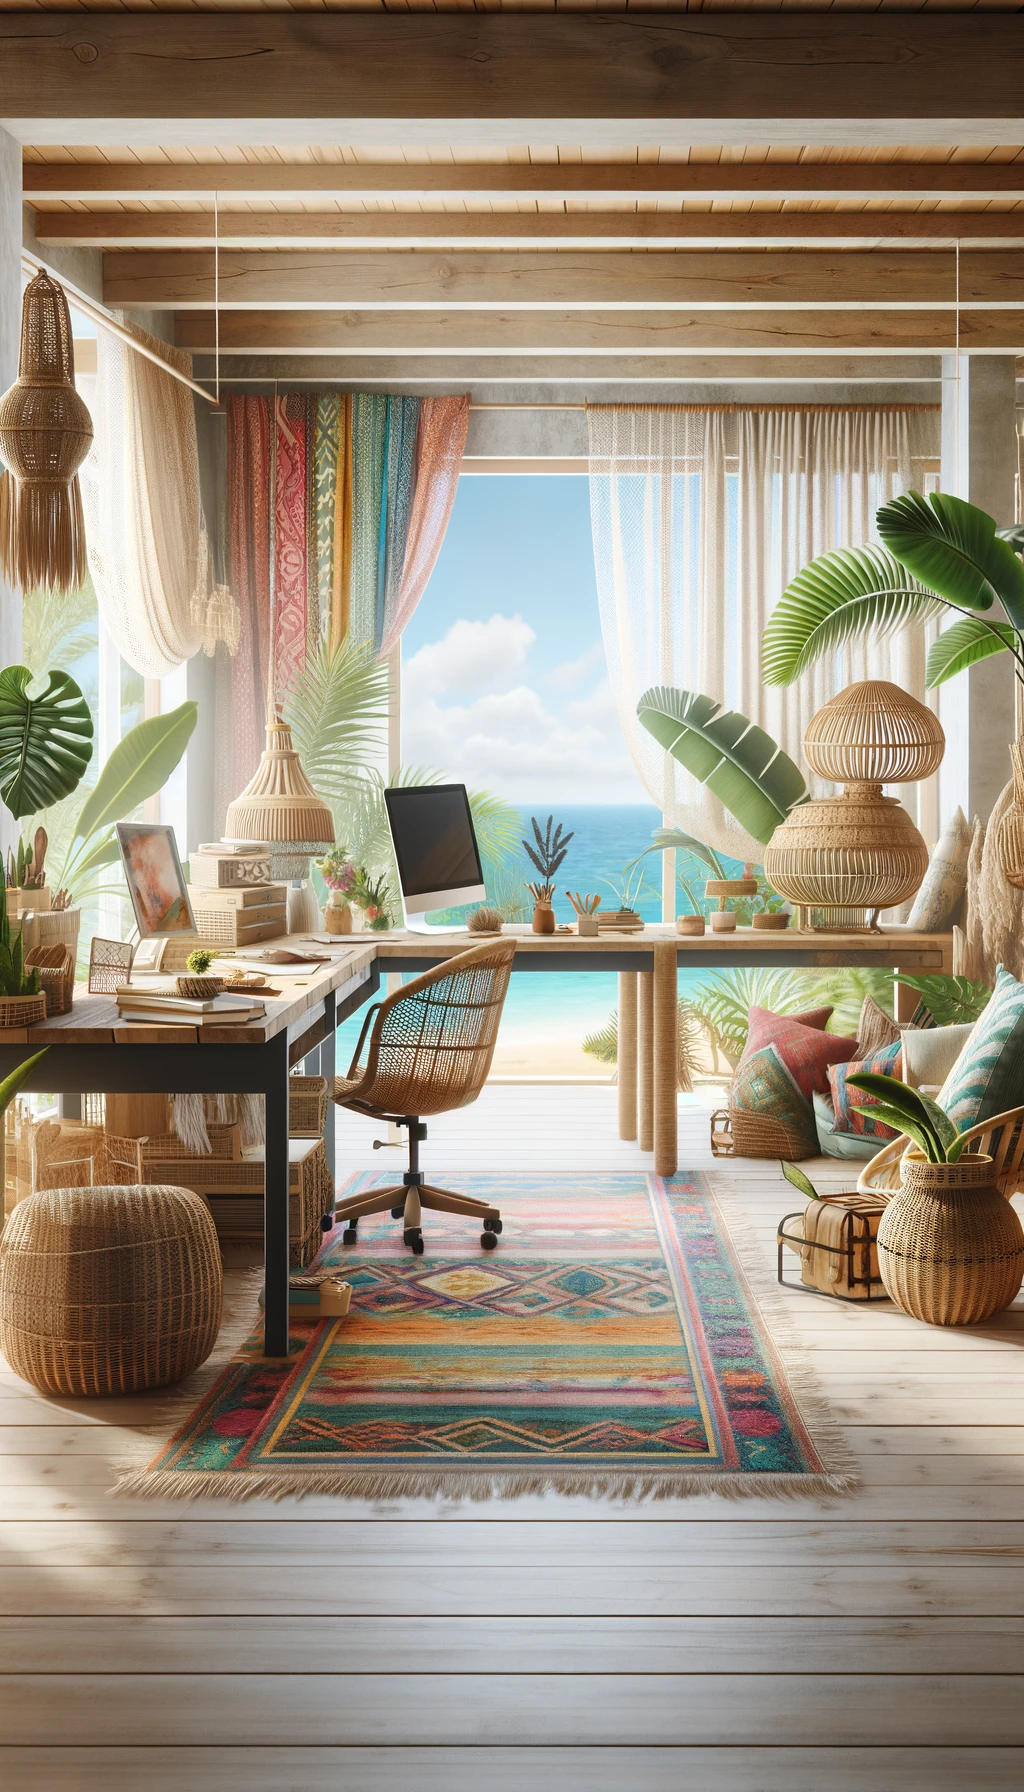 Here is the image of a boho home office by the sea, blending coastal and bohemian styles. The office features natural elements like a wooden desk and rattan chairs, bright colors in decor items, and plants that add a touch of greenery, creating a paradise-like atmosphere